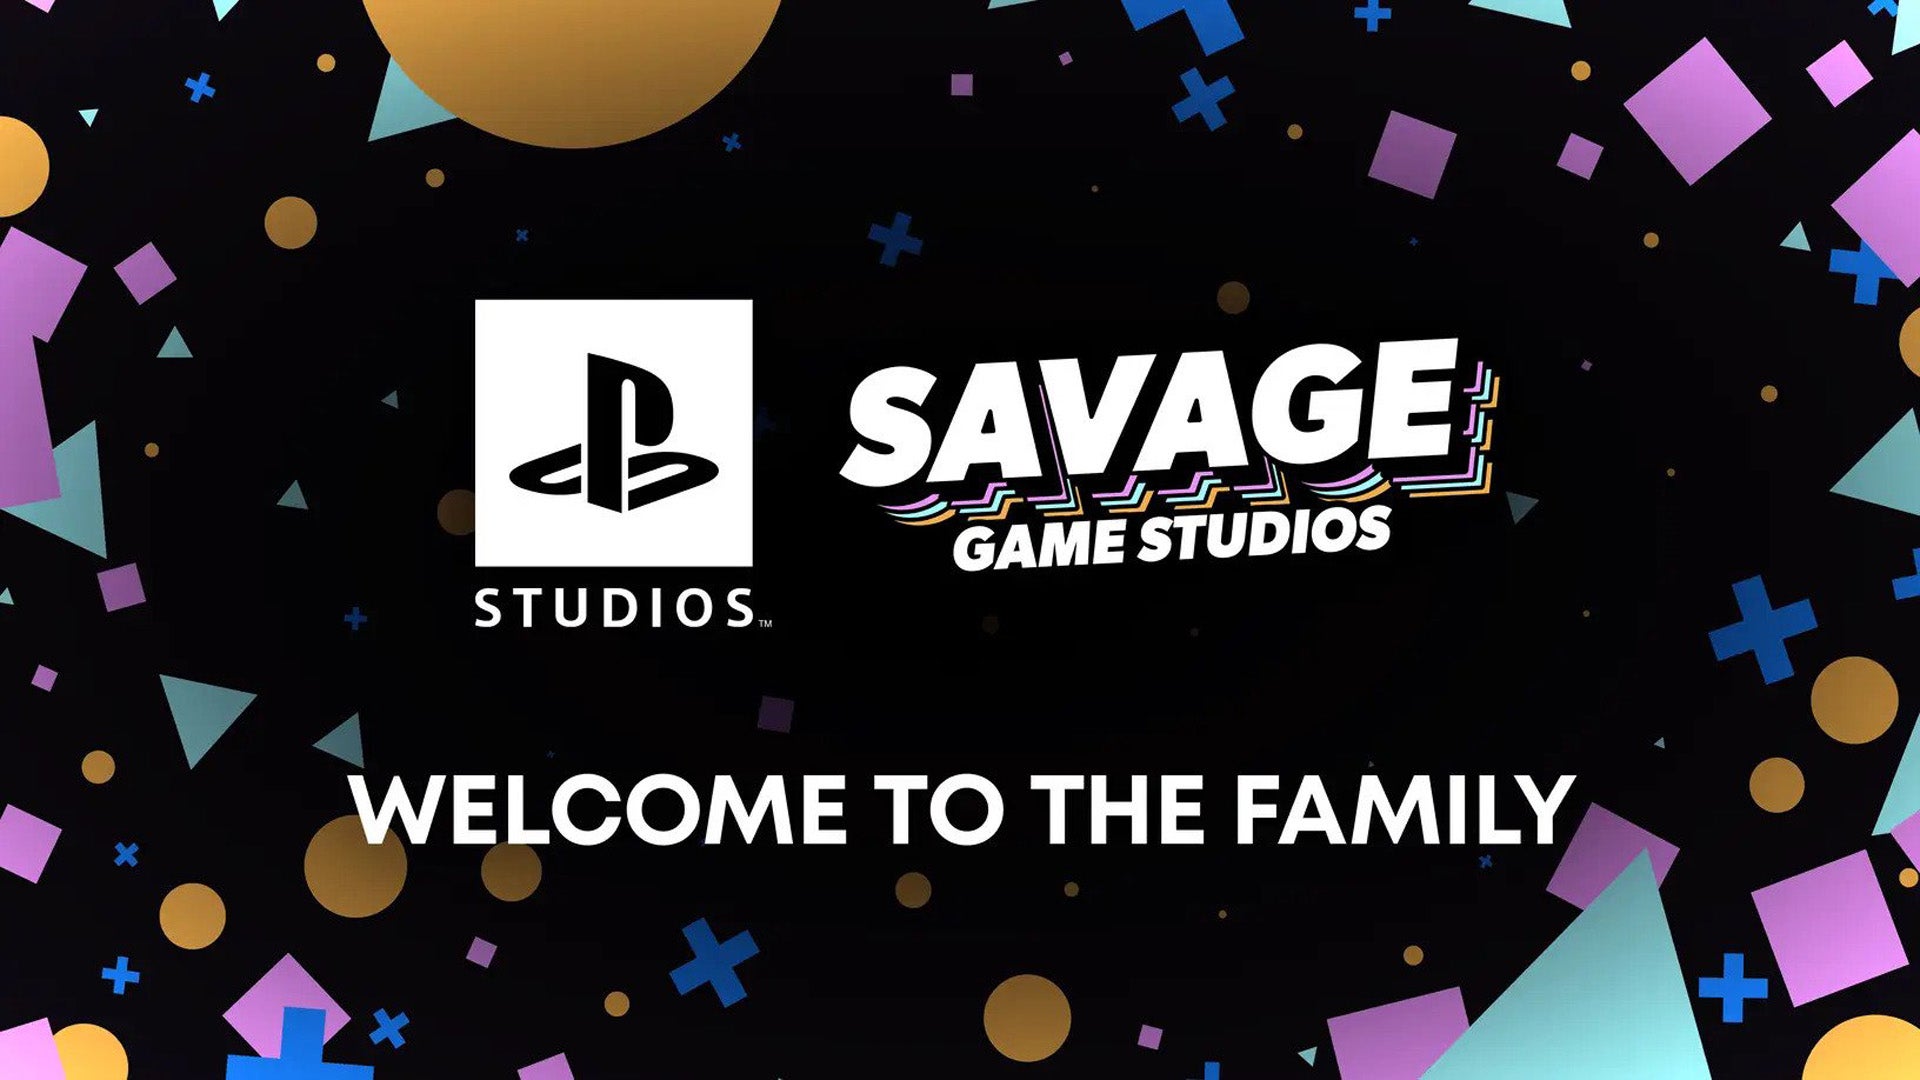 Image for PlayStation now has a mobile division, as it acquires Savage Game Studios